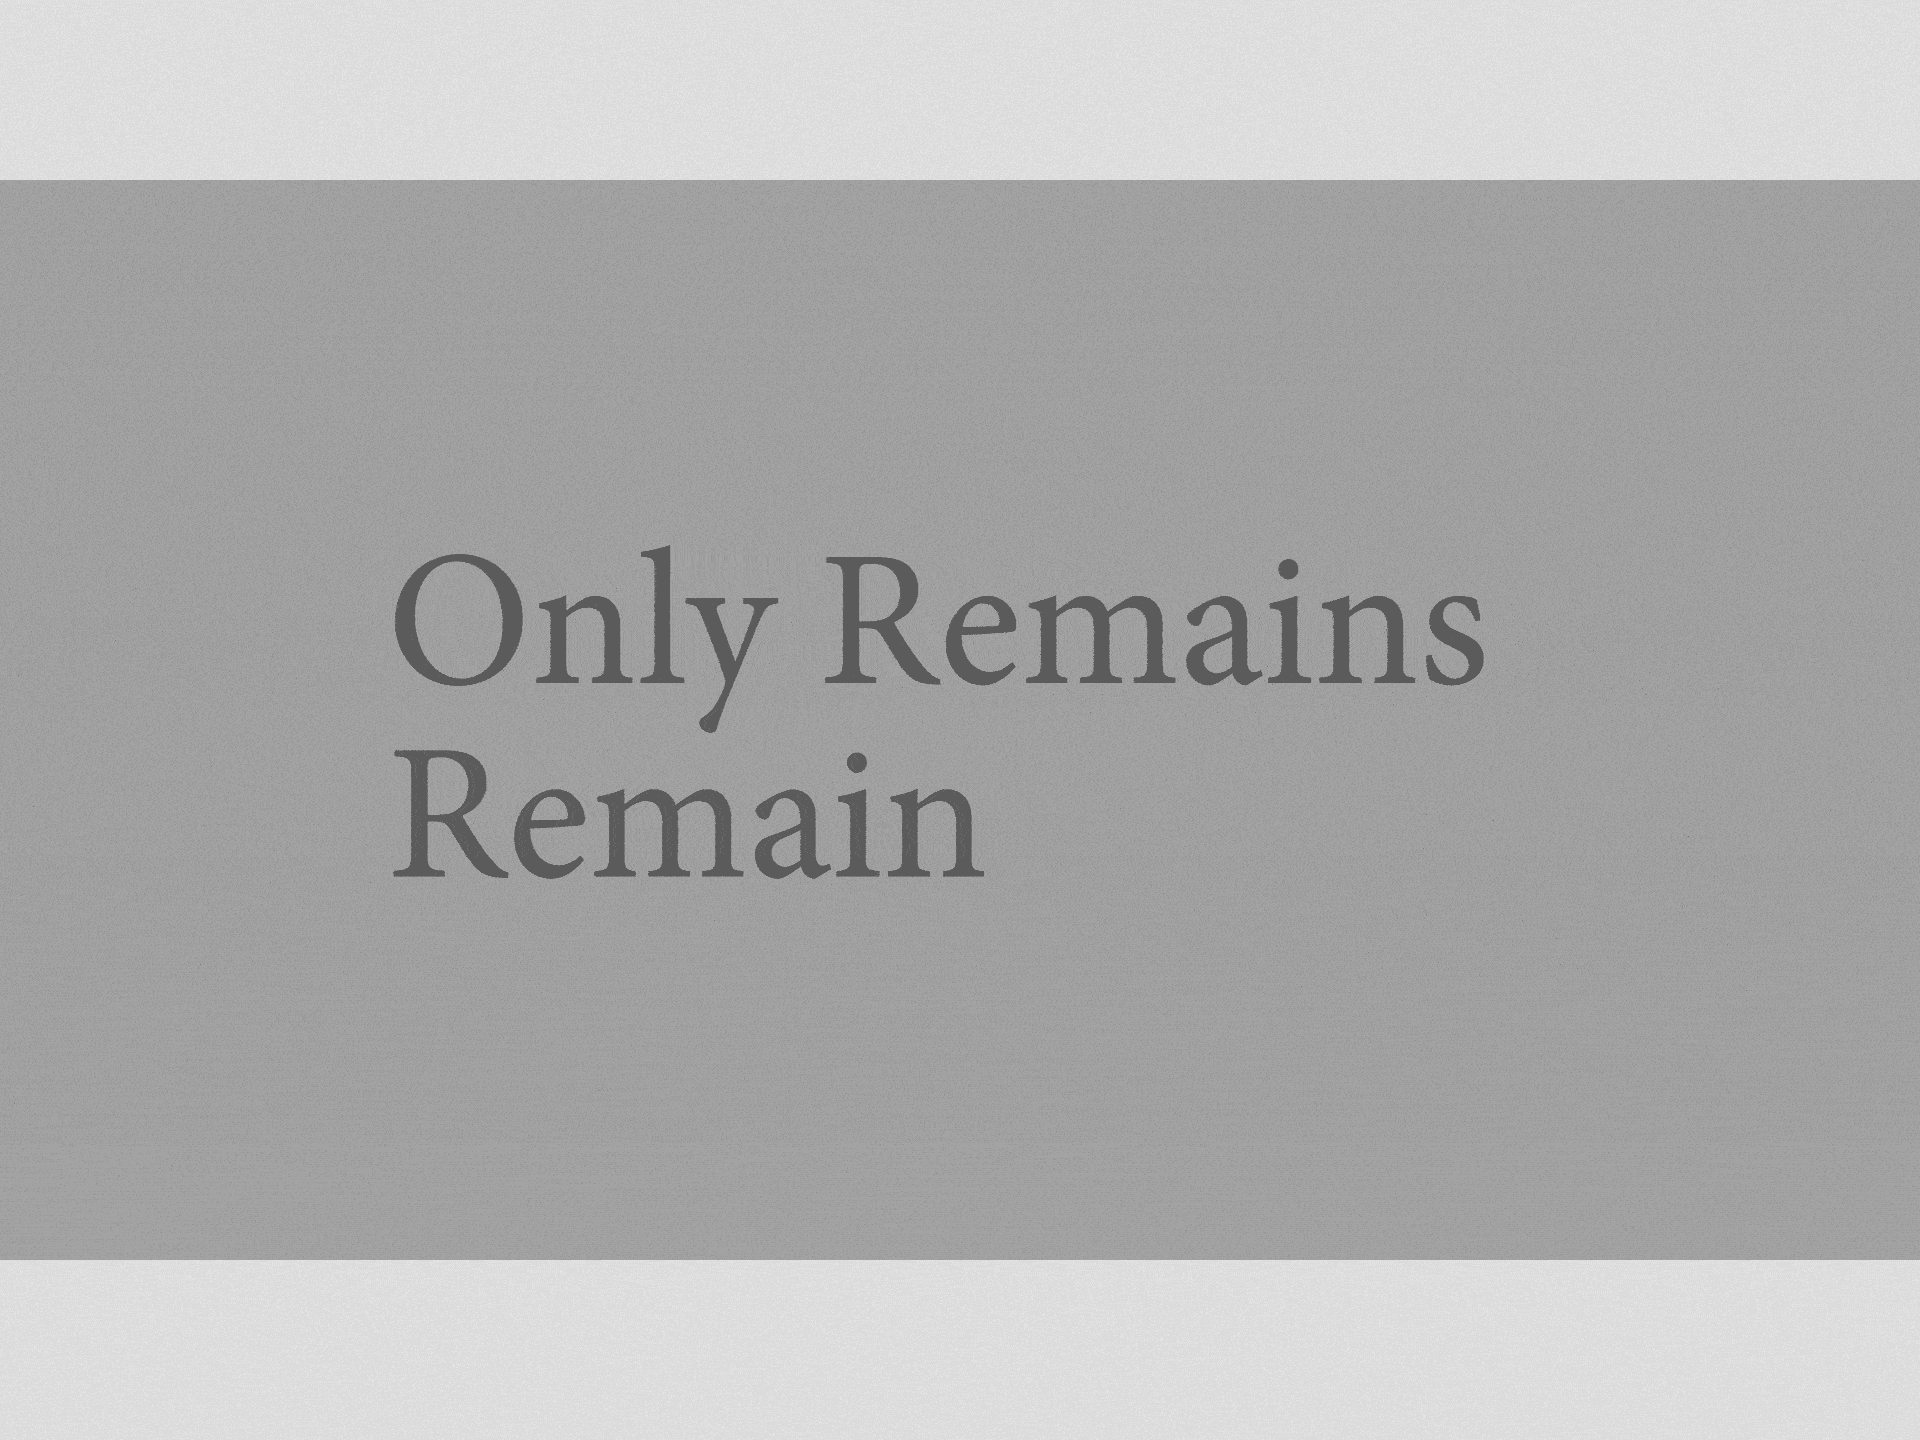 MoMA - Only Remains Remain